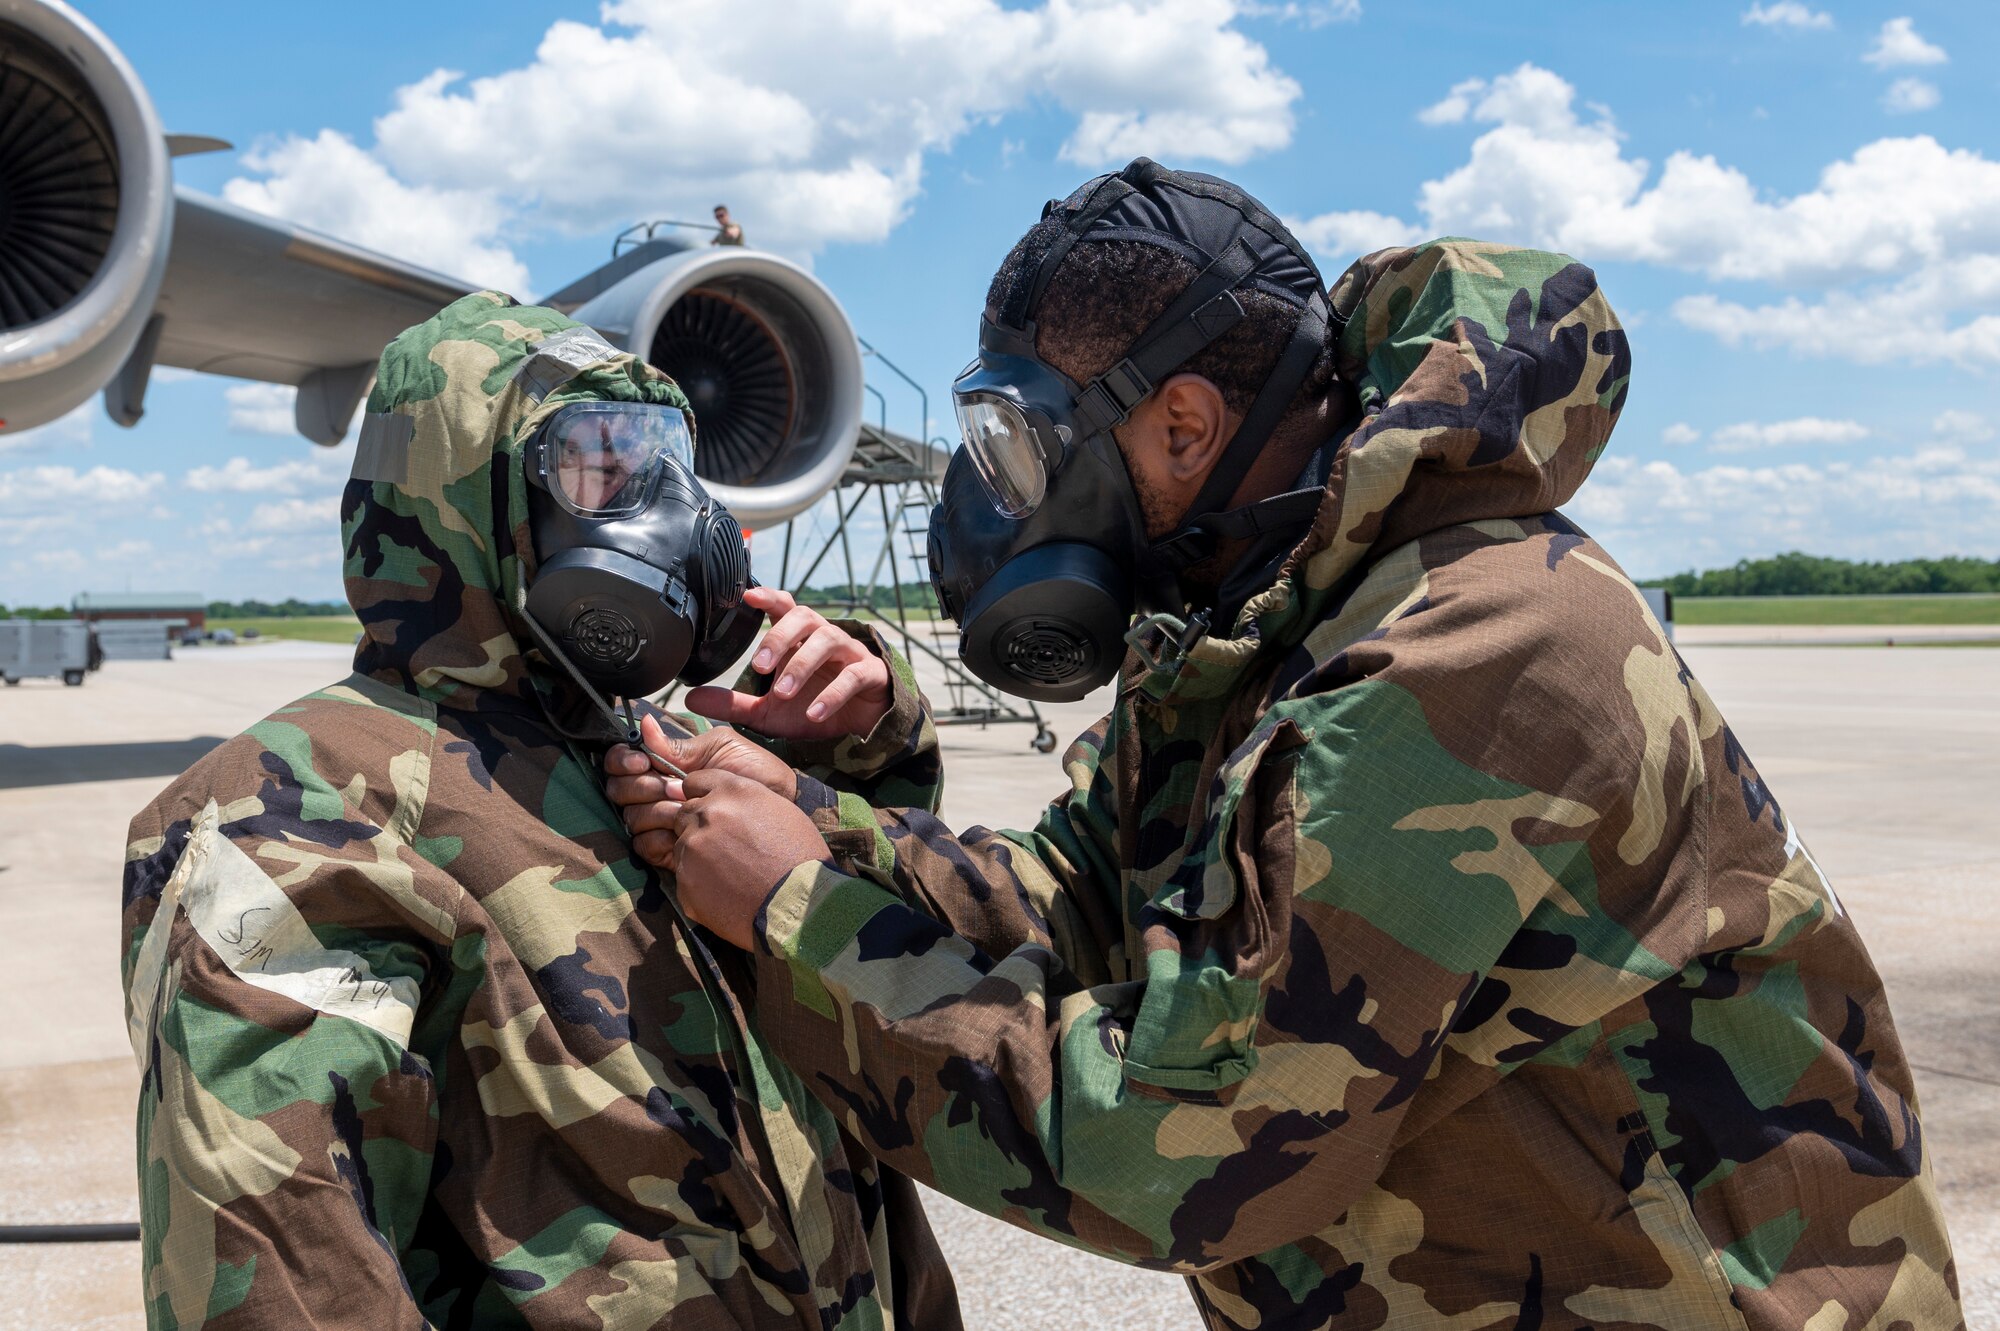 U.S. Air Force Staff Sgt. Anthony Harris (left) and Senior Airman Thomas cook (right), maintainers with the 167th Maintenance Group, check each other’s gear during a simulated chemical environment training at the 167th Airlift Wing, Martinsburg, West Virginia, June 10, 2022. This training included maintainers, loadmasters, pilots and other personnel to simulate the process of preparing, loading and flying the aircraft while in a hazardous chemical environment